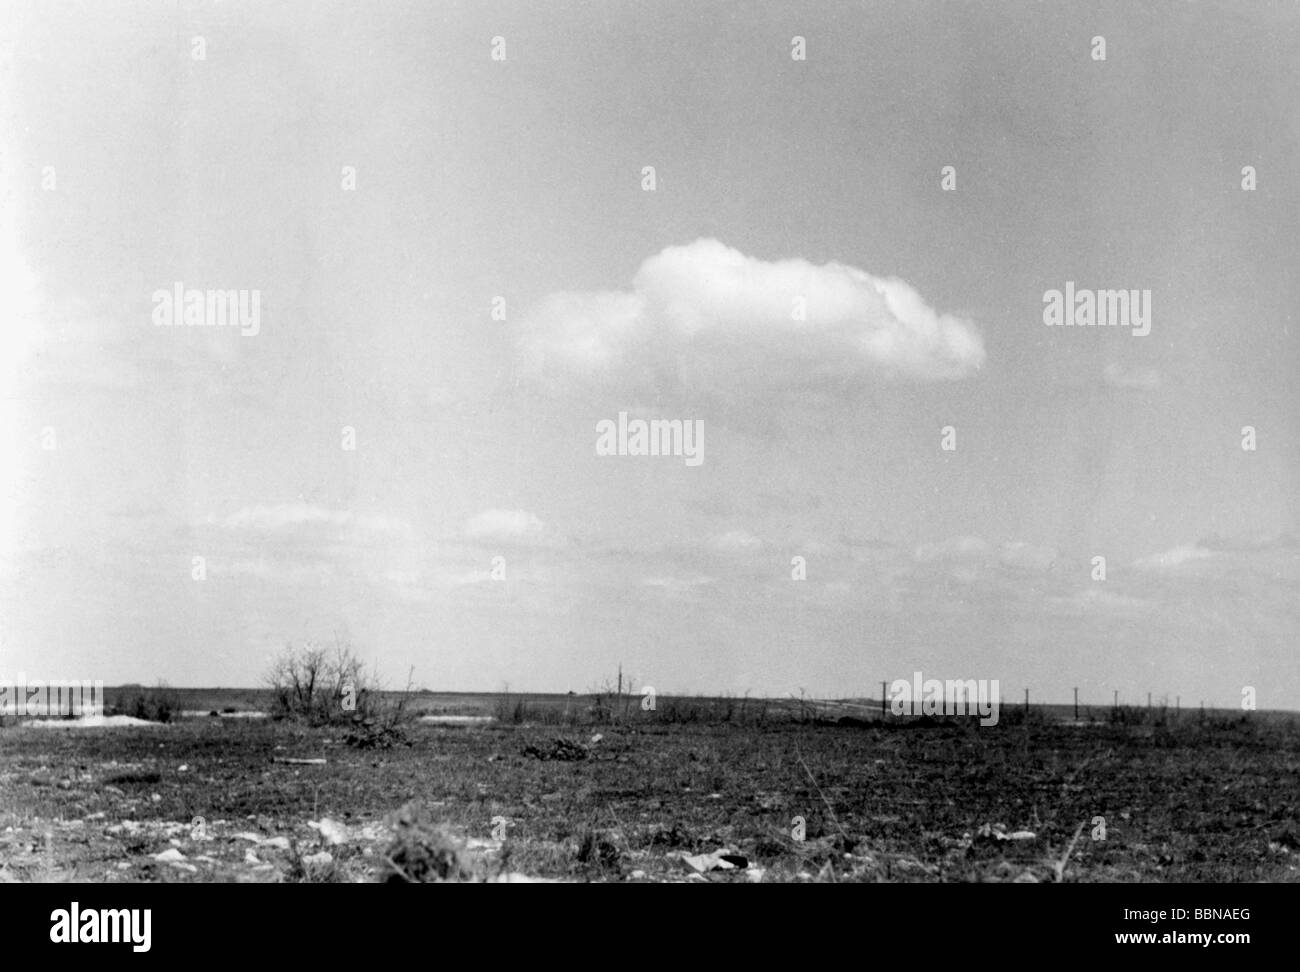 events, Second World War / WWII, Russia 1944 / 1945, Crimea, Sevastopol, view of the main front, seen from the German emplacements, April 1944, on the horizon two destroyed Soviet tanks, USSR, Soviet Union, 20th century, historic, historical, Ukraine, Eastern Front, frontline, landscape, landscapes, 1940s, Stock Photo